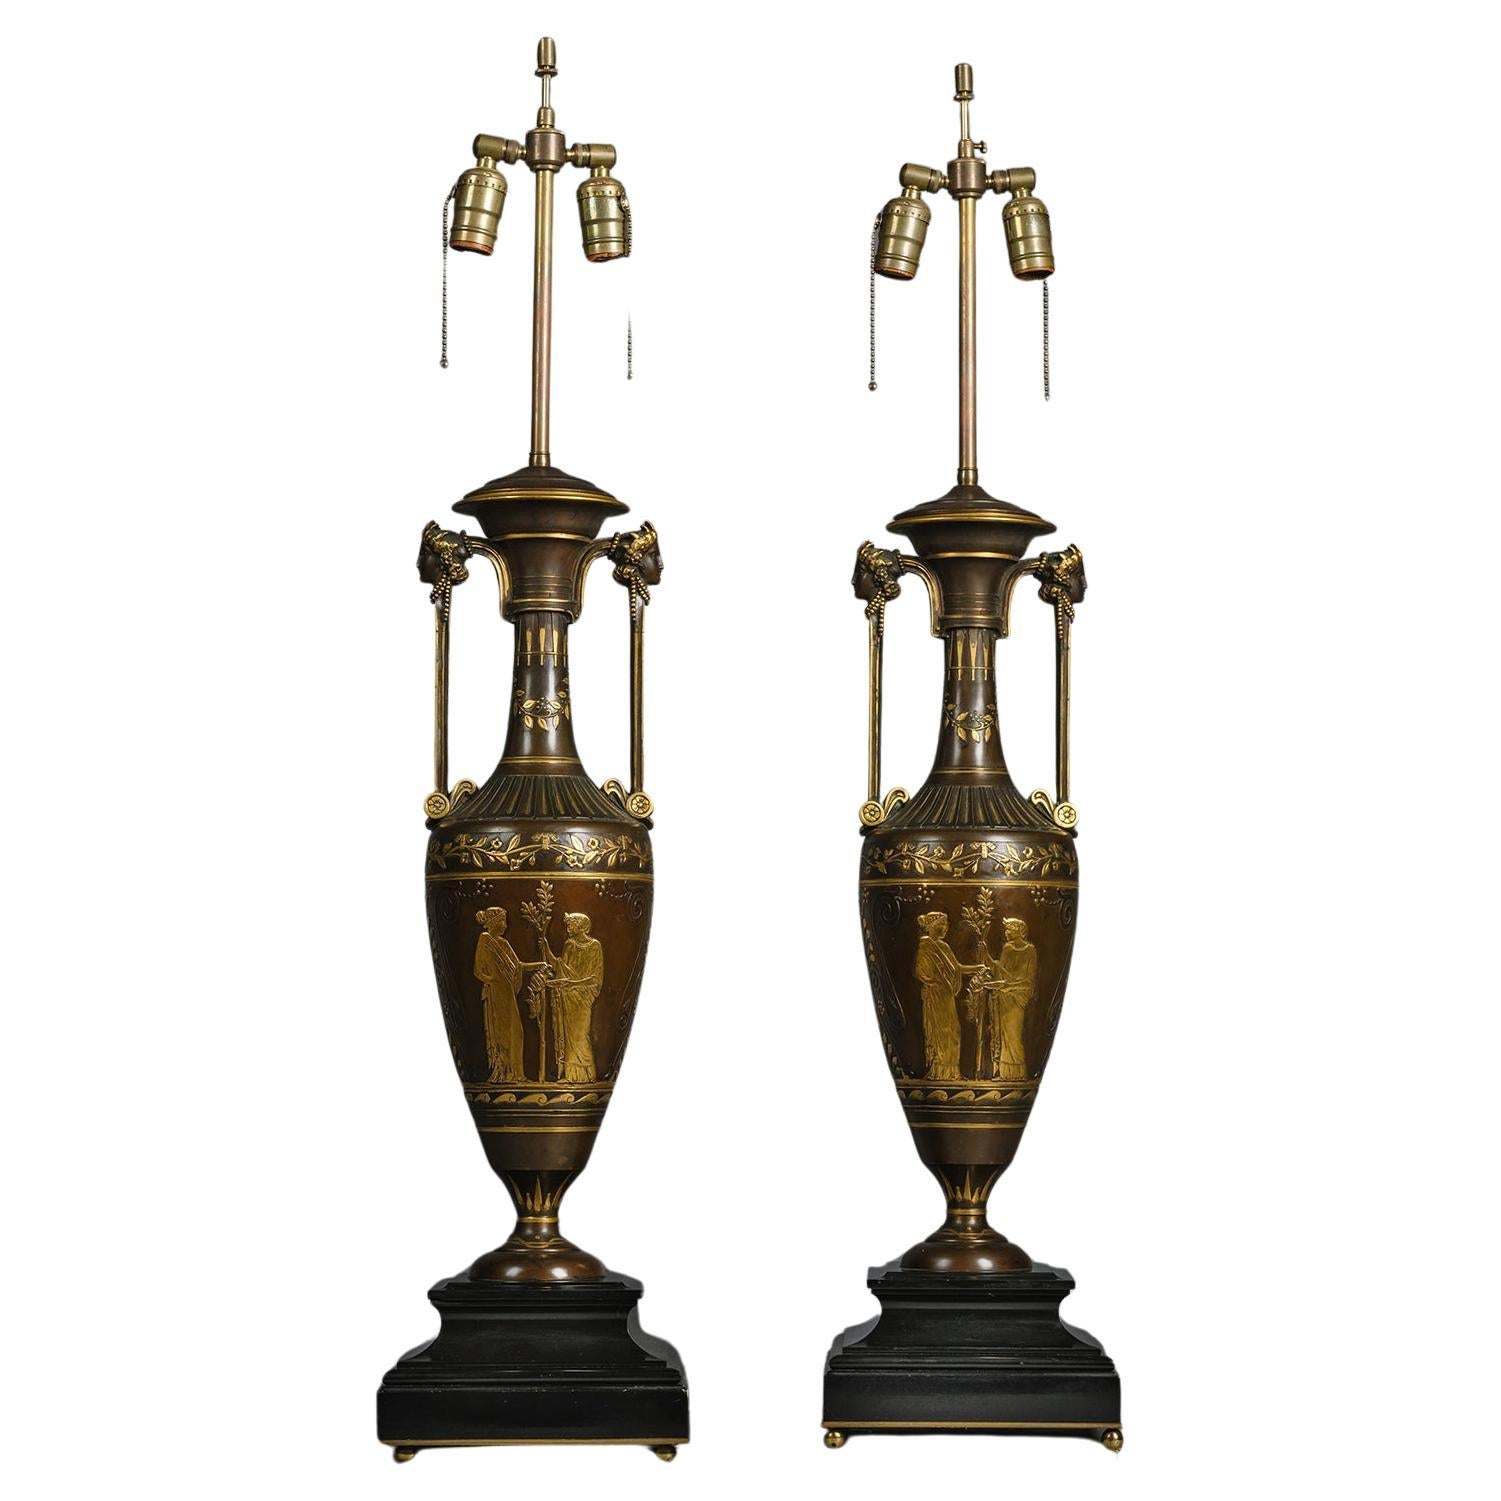 A Pair of Néo-Grec Parcel-Gilt Patinated Bronze Vases Mounted as Lamps For Sale